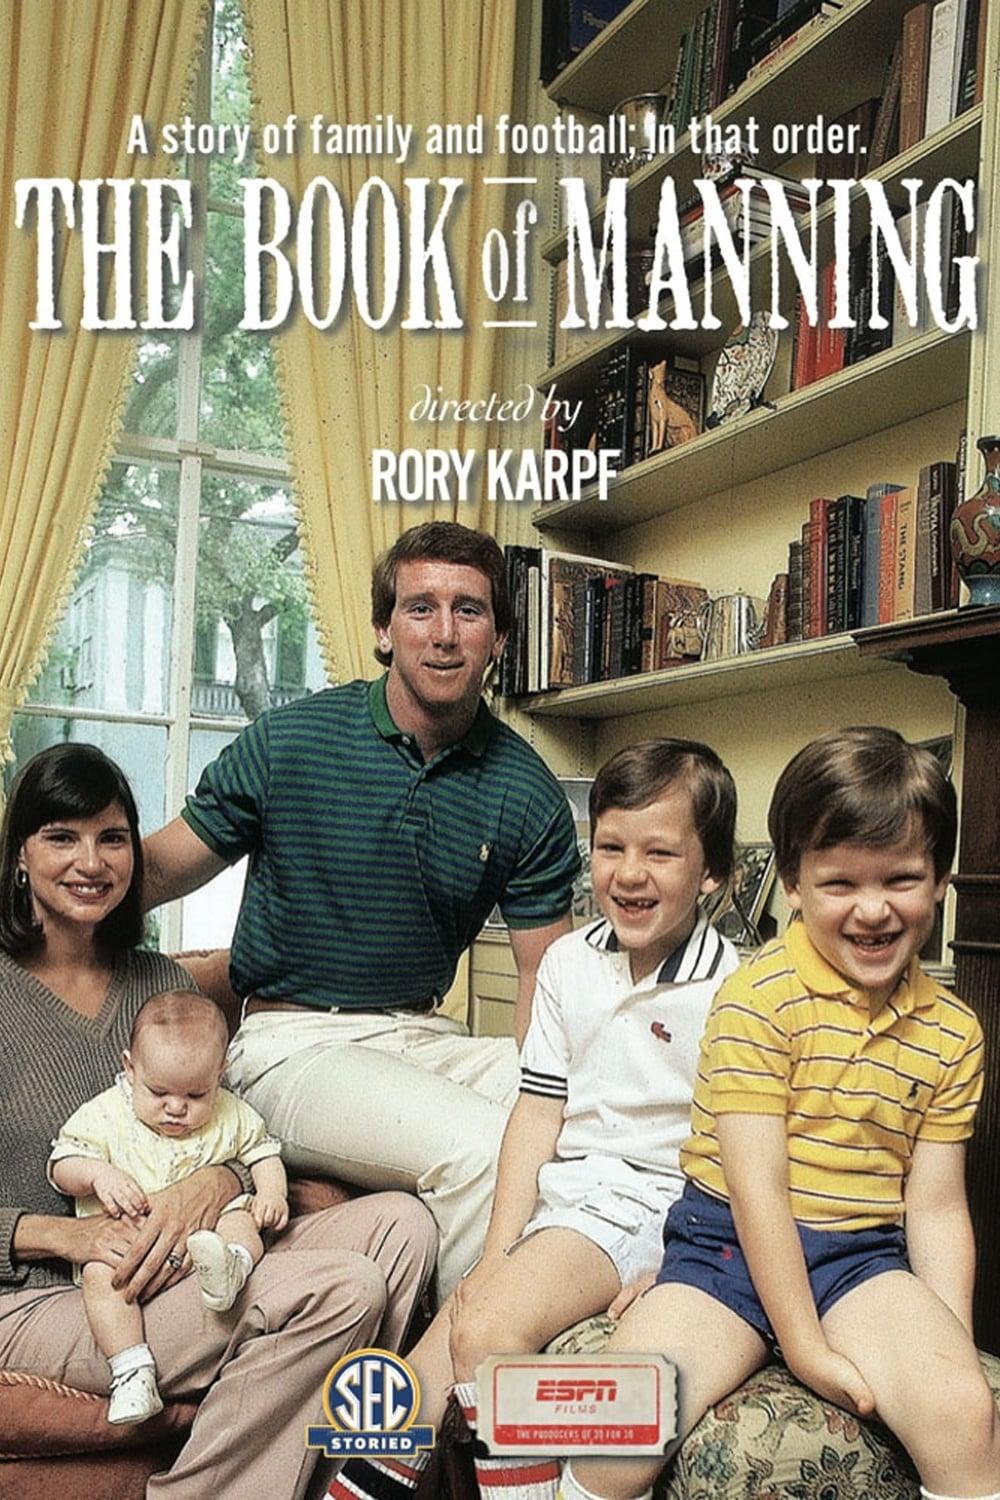 The Book of Manning poster